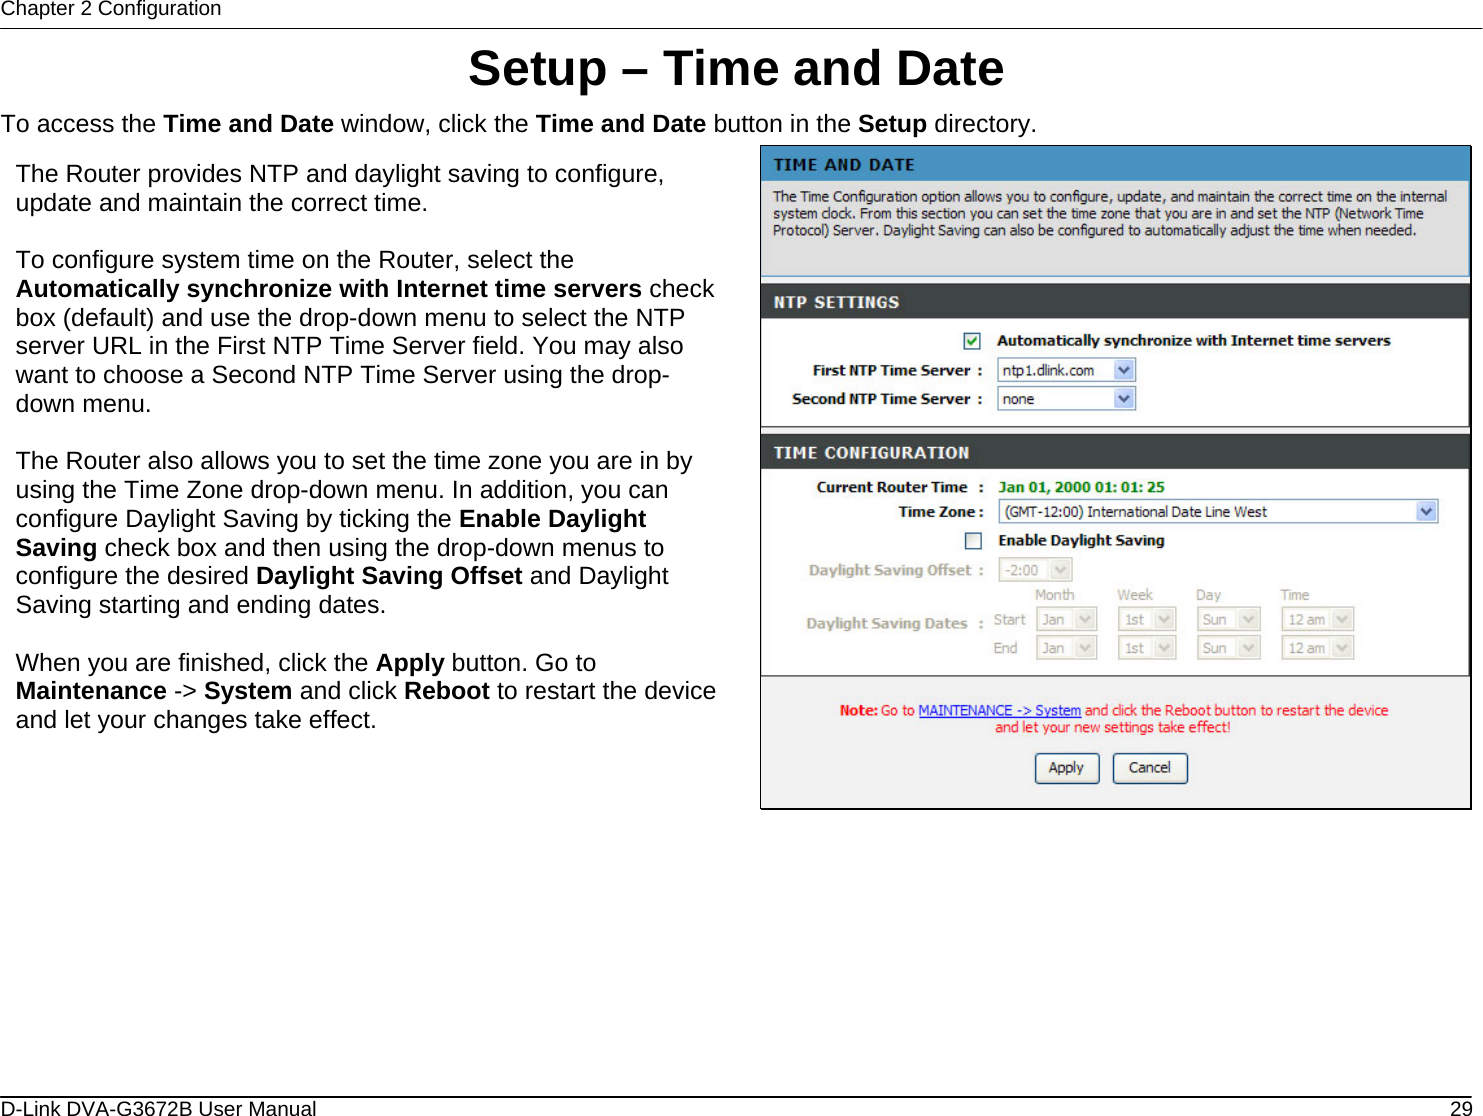 Chapter 2 Configuration Setup – Time and Date To access the Time and Date window, click the Time and Date button in the Setup directory.  The Router provides NTP and daylight saving to configure, update and maintain the correct time.  To configure system time on the Router, select the Automatically synchronize with Internet time servers check box (default) and use the drop-down menu to select the NTP server URL in the First NTP Time Server field. You may also want to choose a Second NTP Time Server using the drop-down menu.   The Router also allows you to set the time zone you are in by using the Time Zone drop-down menu. In addition, you can configure Daylight Saving by ticking the Enable Daylight Saving check box and then using the drop-down menus to configure the desired Daylight Saving Offset and Daylight Saving starting and ending dates.  When you are finished, click the Apply button. Go to Maintenance -&gt; System and click Reboot to restart the device and let your changes take effect.           D-Link DVA-G3672B User Manual  29